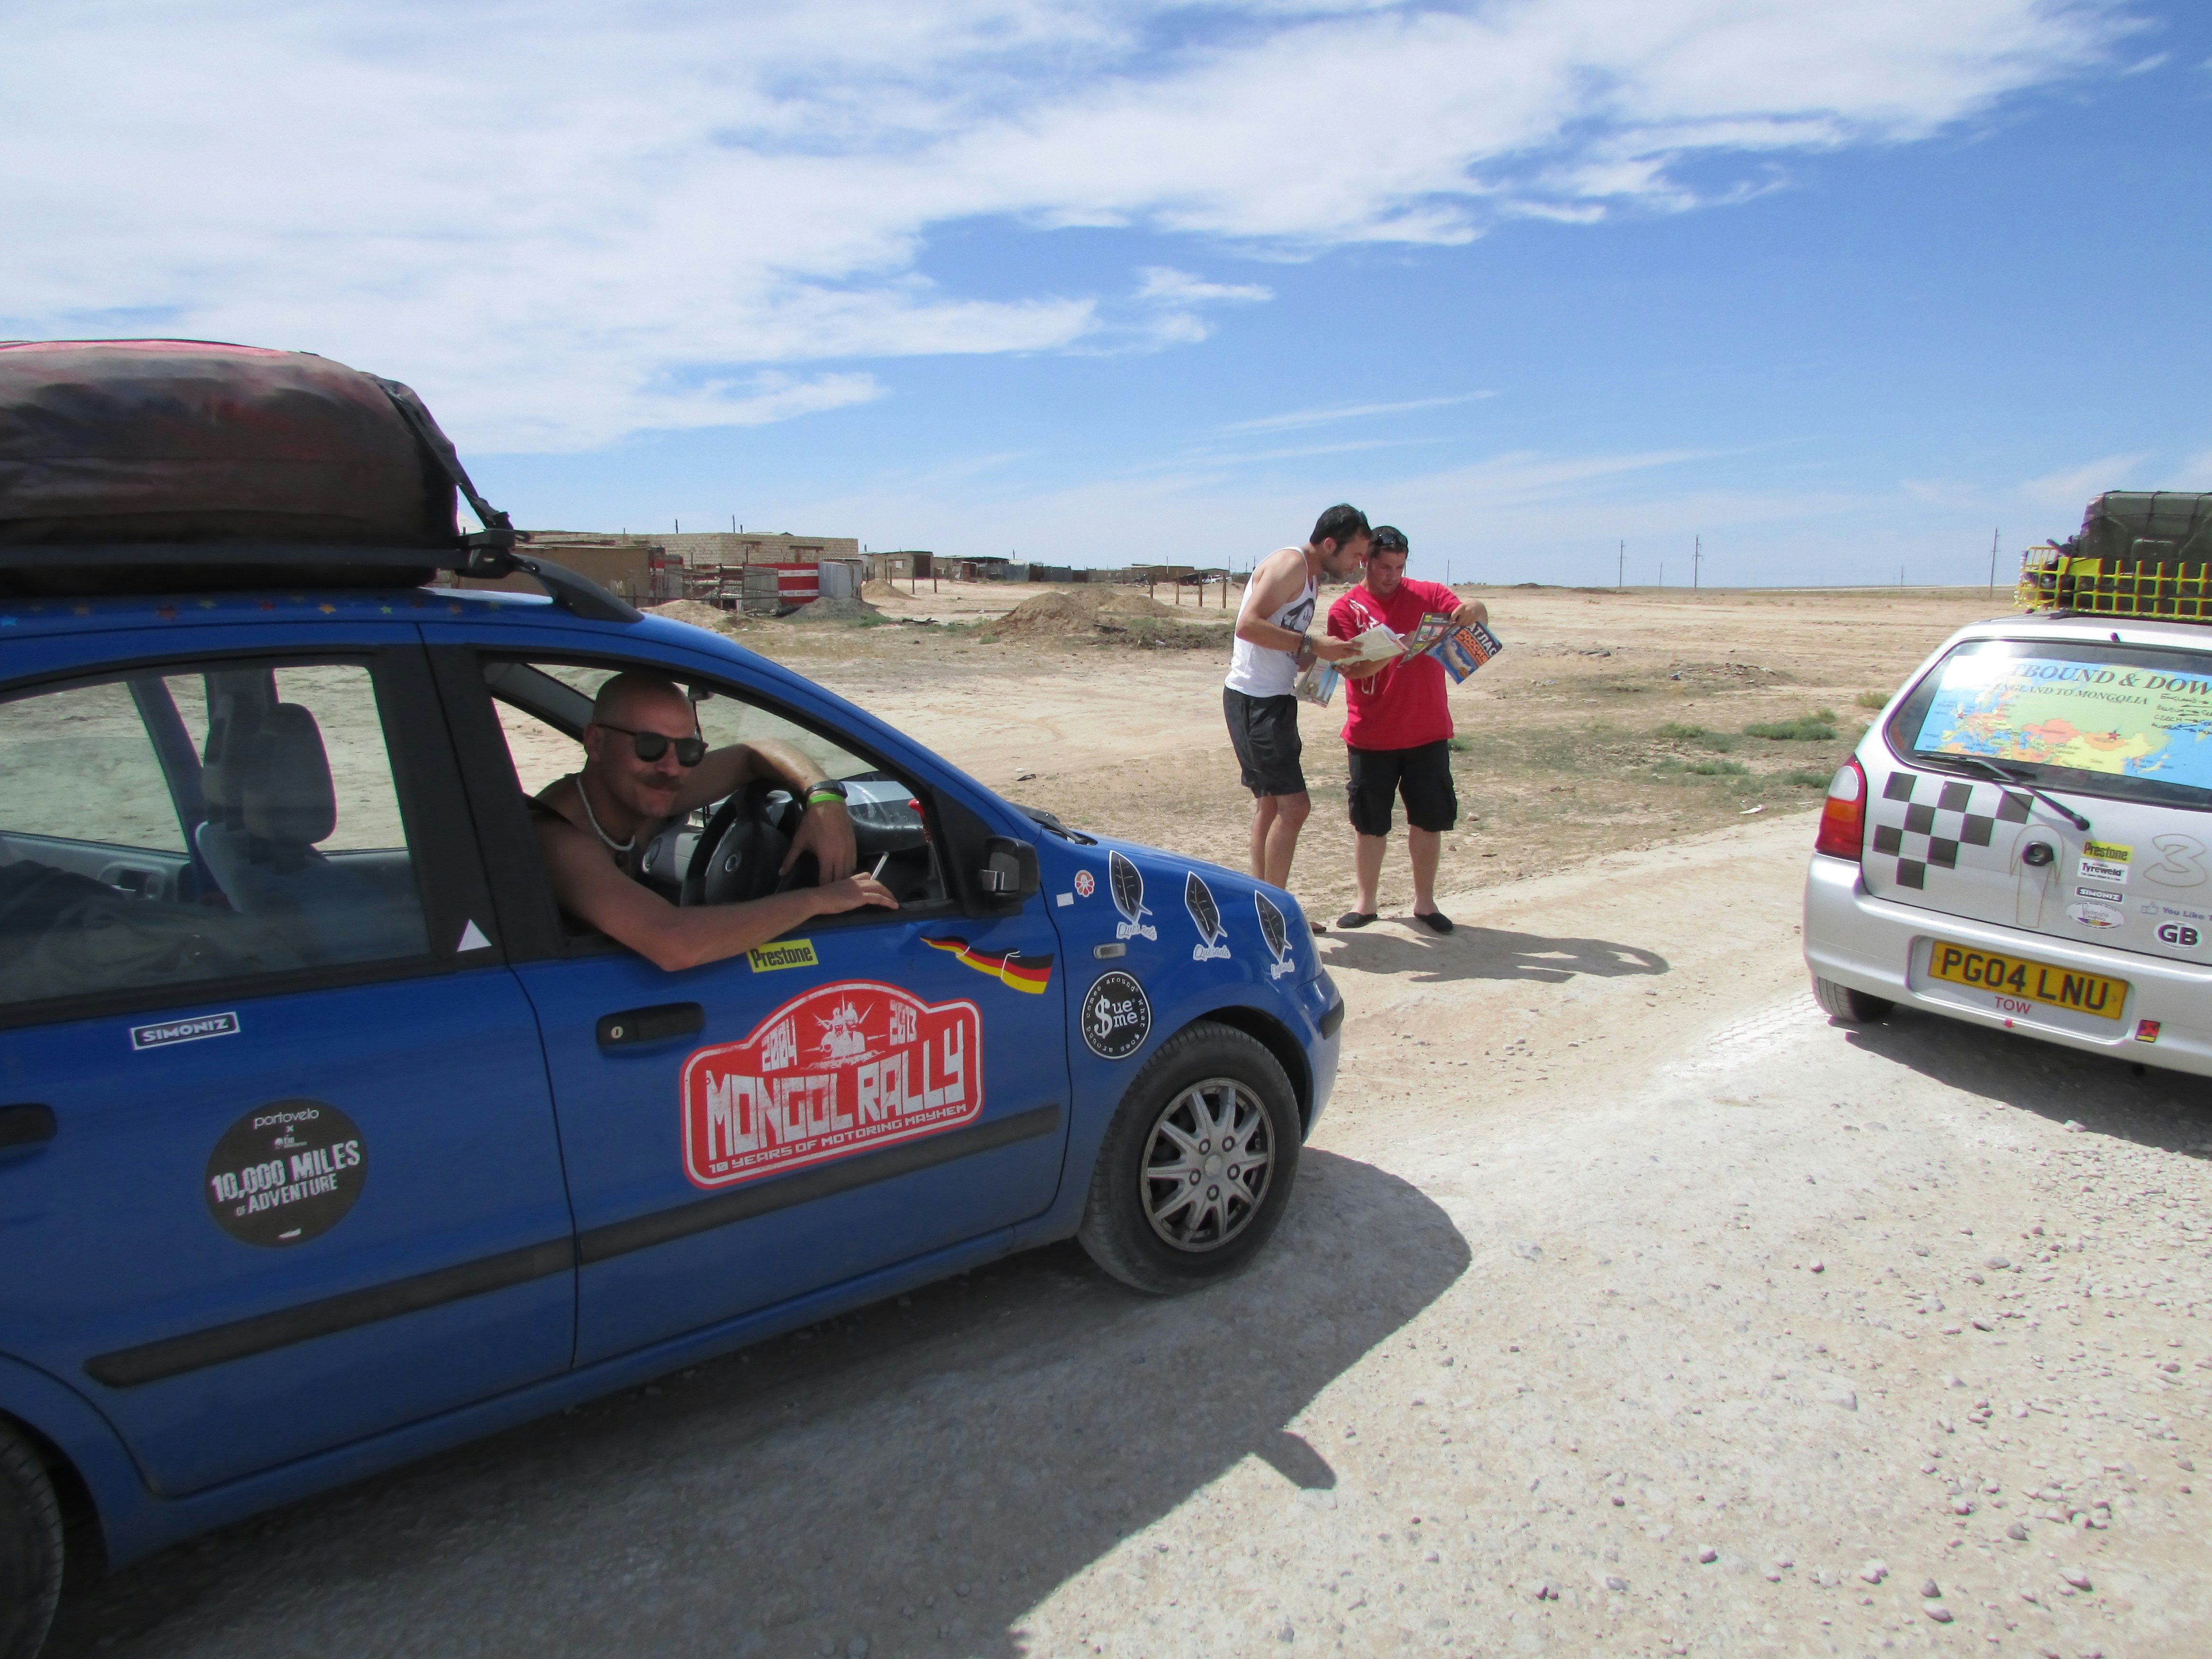 A blue European car is parked next to a white hatchback with a rear window wrap with a map printed on it. Between the cars stand two Mongol Rally participants studying a map. The landscape all around is a bare desert.